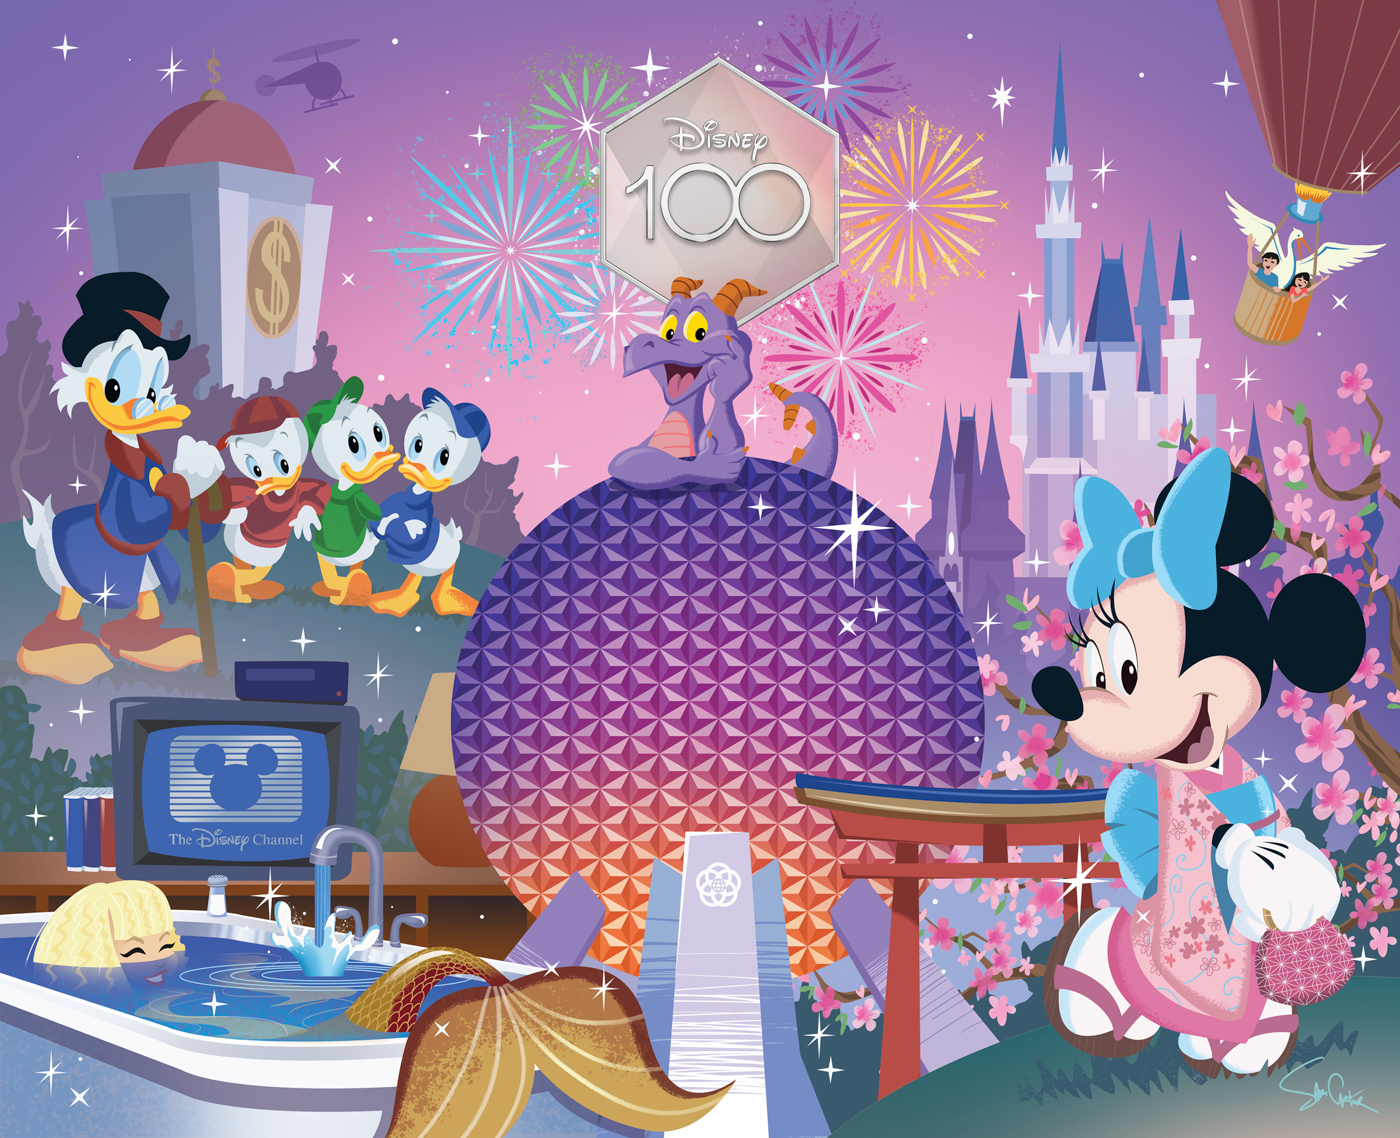 New Disney100 Puzzle Featuring Band Leader Mickey & Figment at